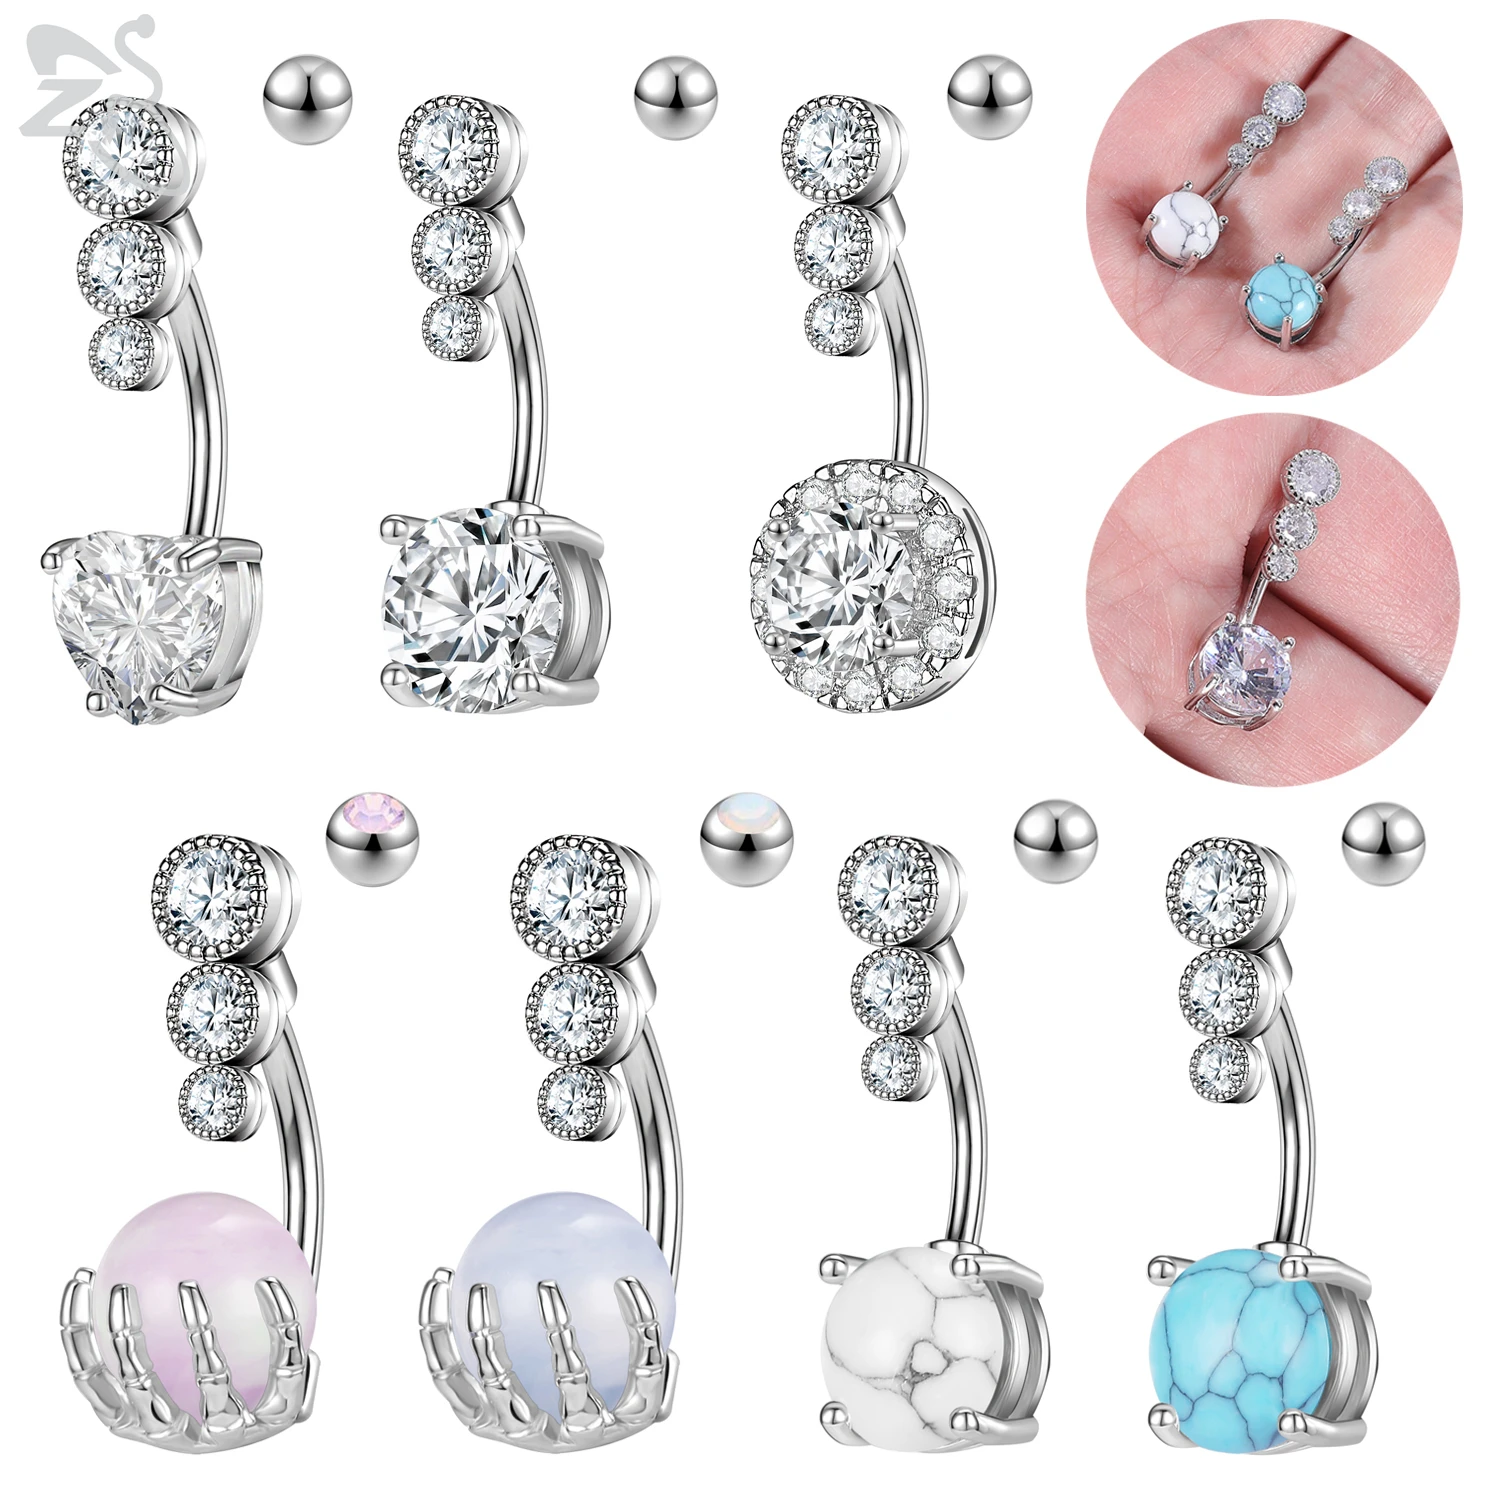 

ZS 1 PC Round CZ Crystal Pendant Belly Button Ring Opal Claw Drop Belly Rings 14G Stainless Steel Navel Barball Piercing Jewelry